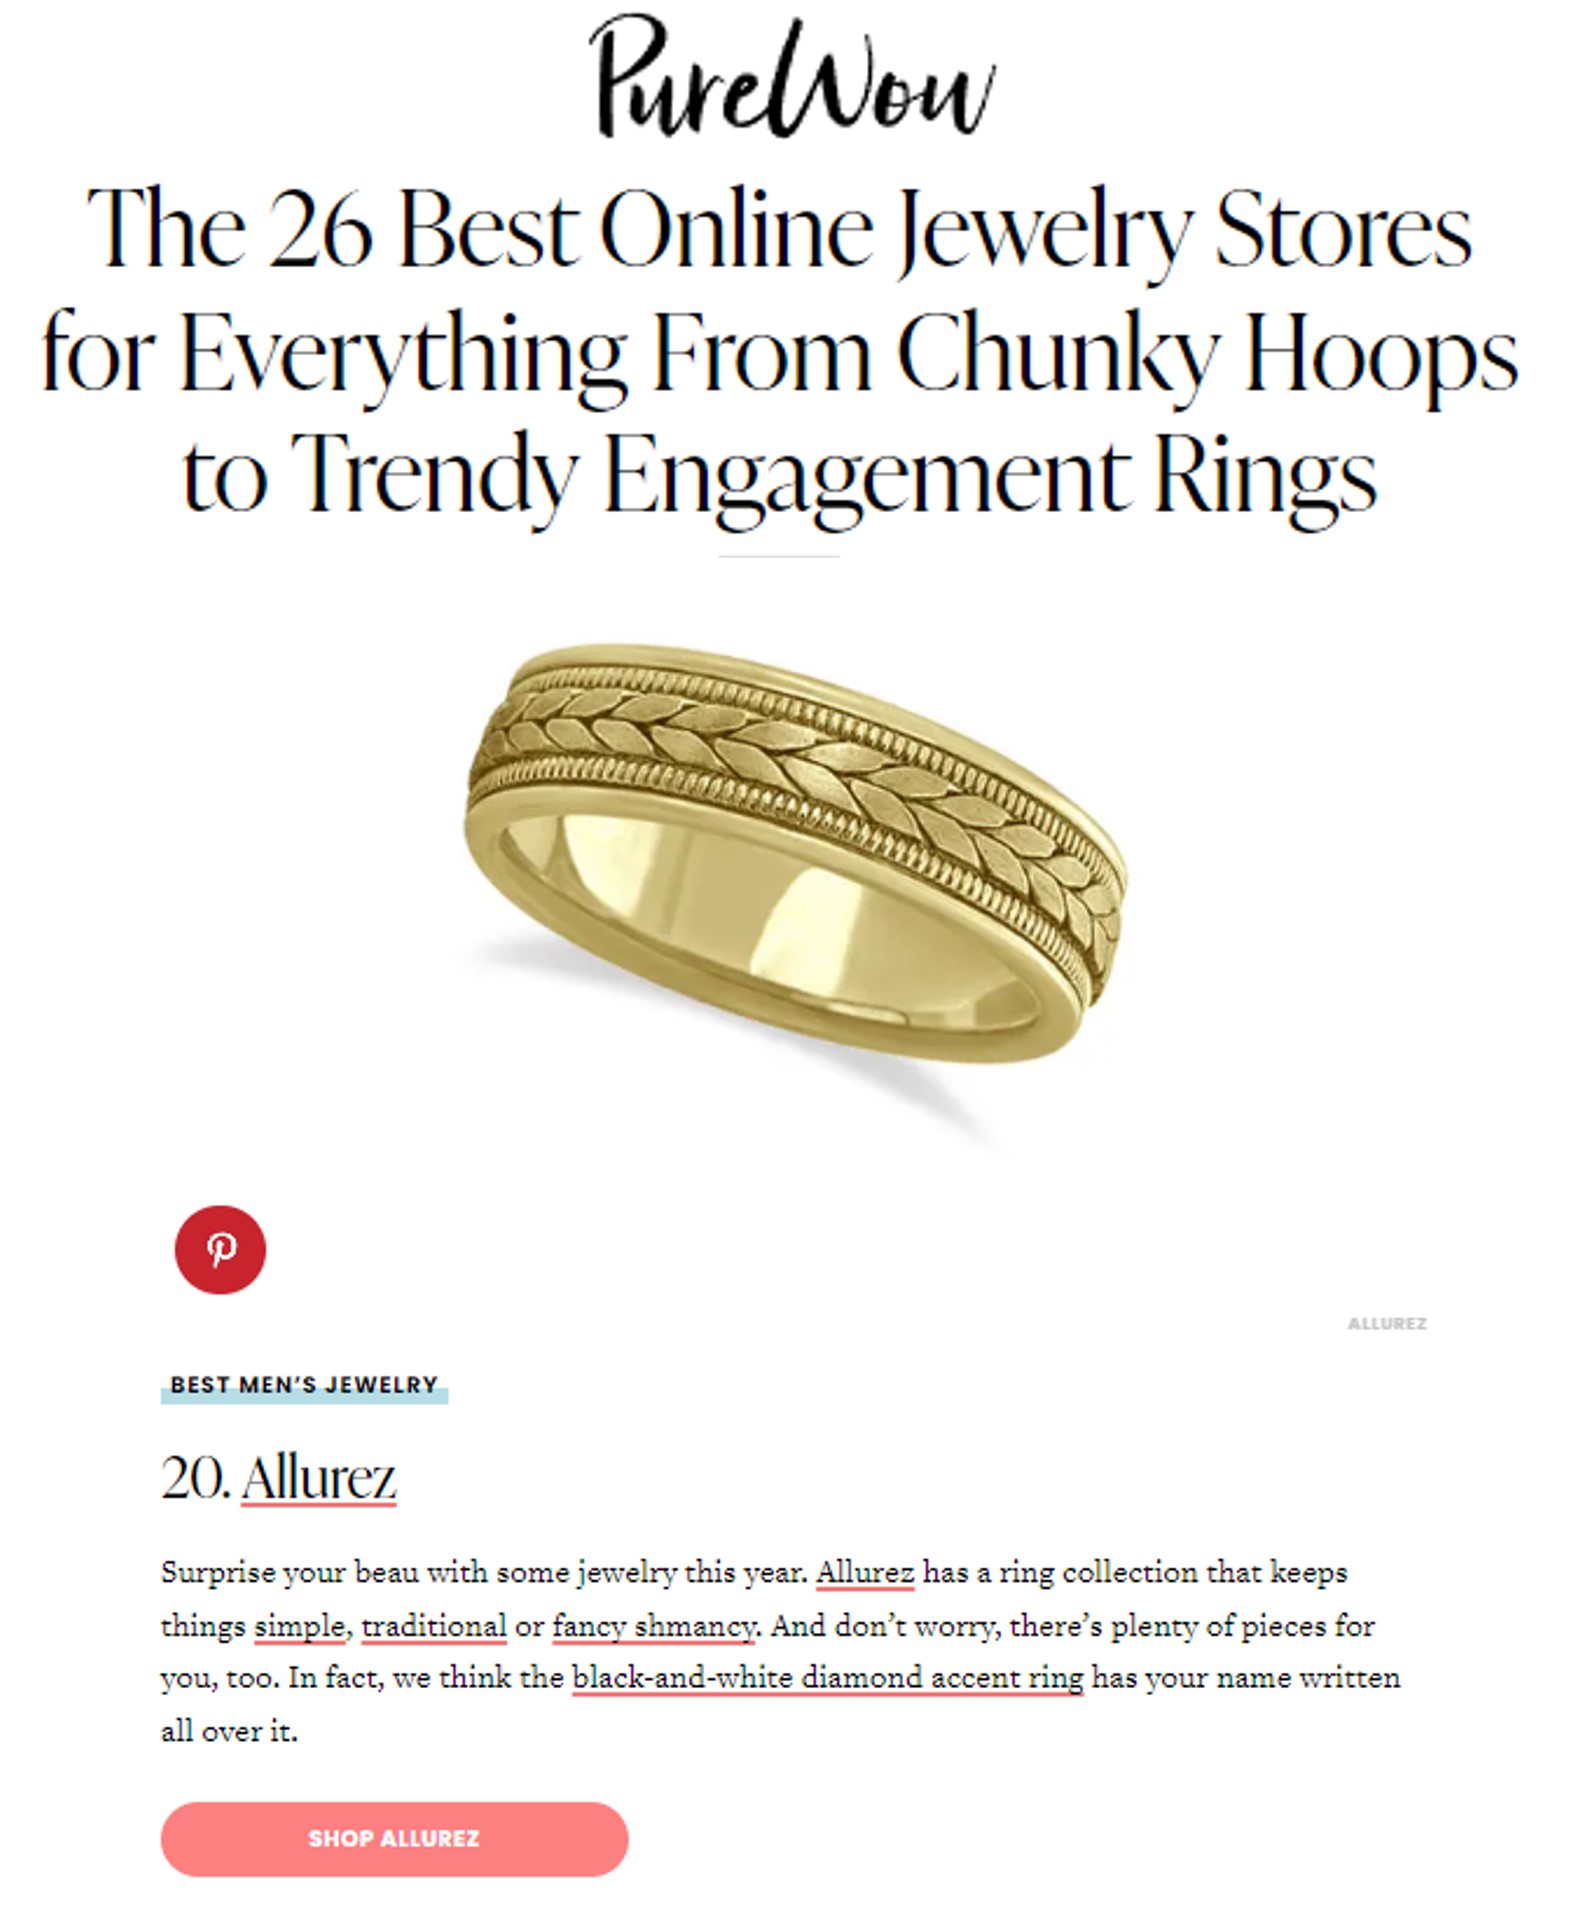 The 26 Best Online Jewelry Stores for Everything From Chunky Hoops to Trendy Engagement Rings